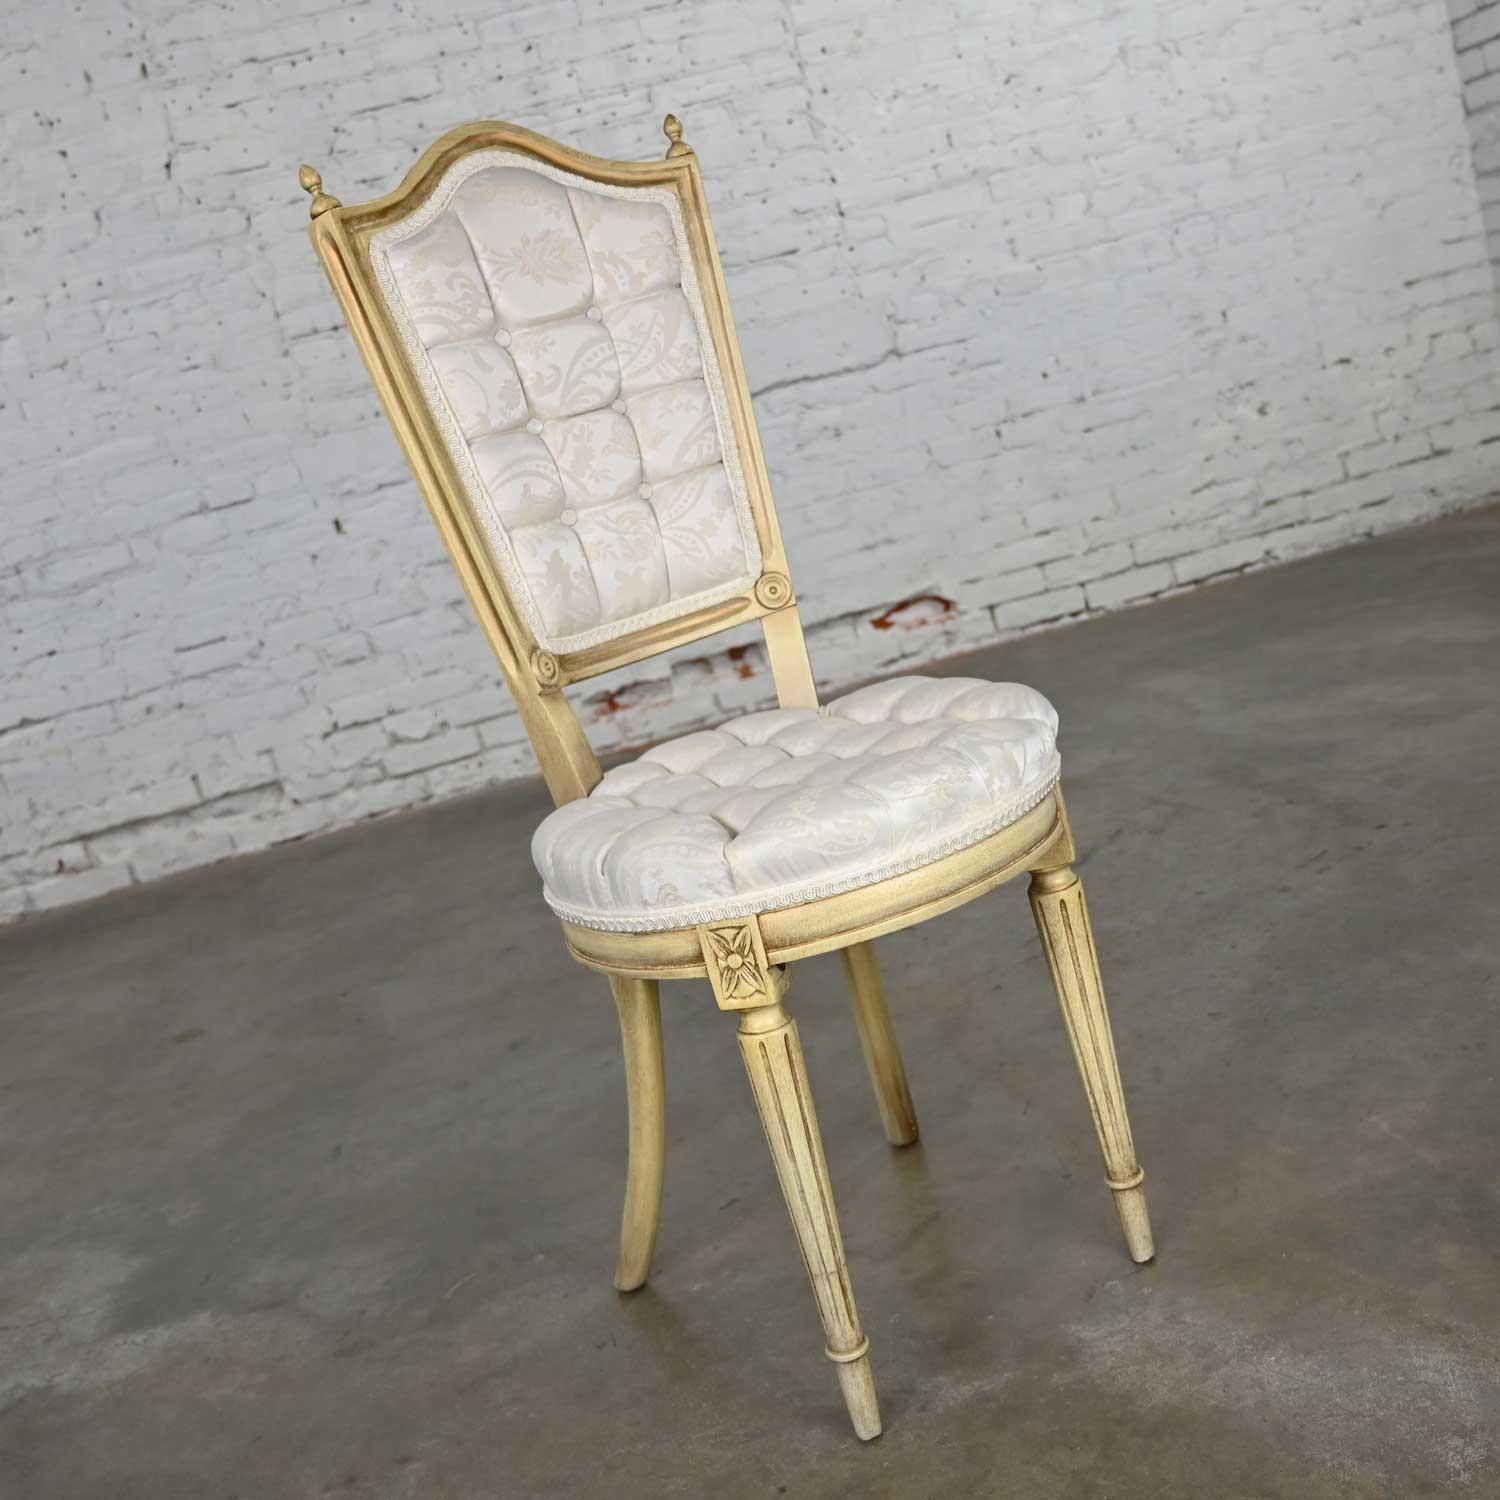 Beautiful French Provincial, Hollywood Regency, Louis XVI style antique white dressing or accent chair attributed to Prince Howard Furniture. It wears its original white brocade fabric. Wonderful condition, keeping in mind that this is vintage and